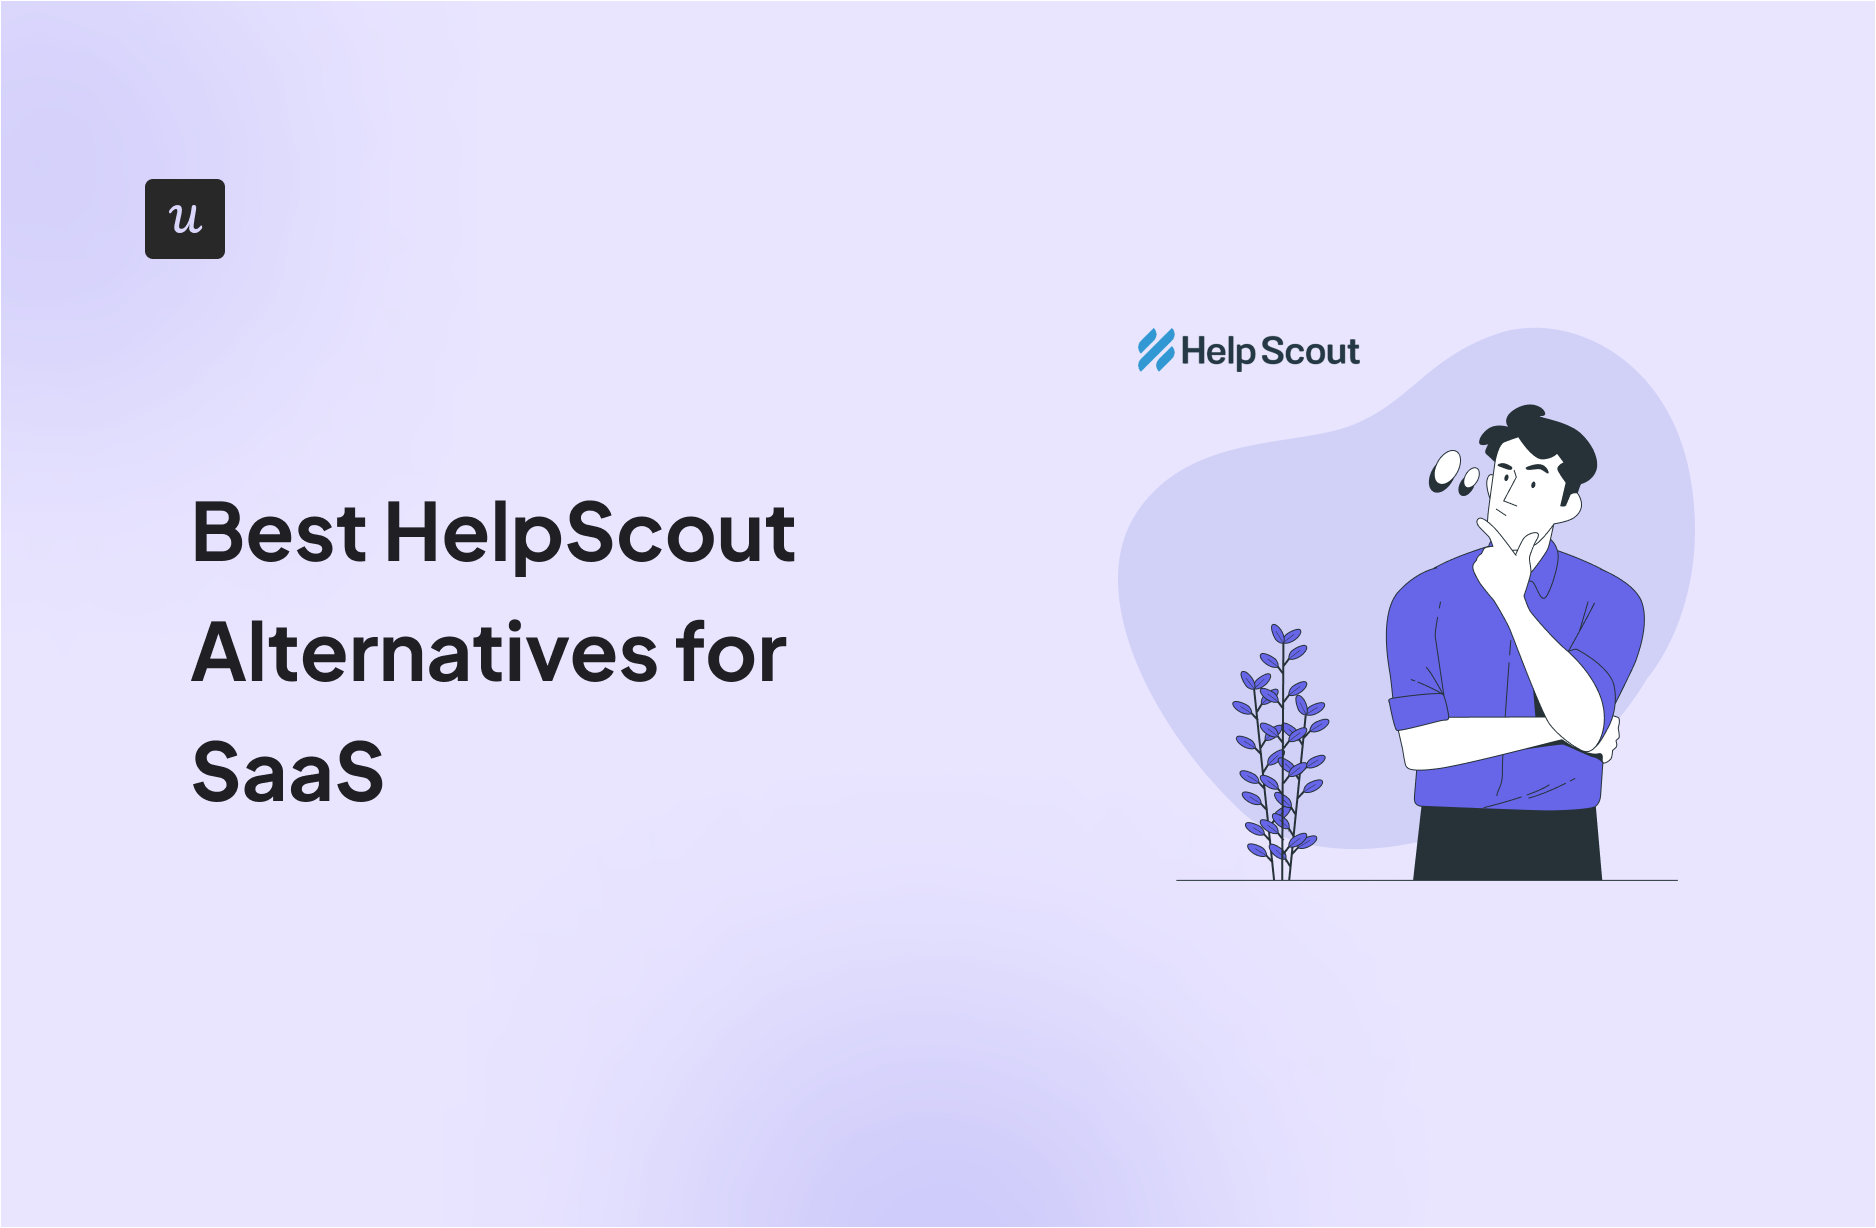 Best HelpScout Alternatives for SaaS